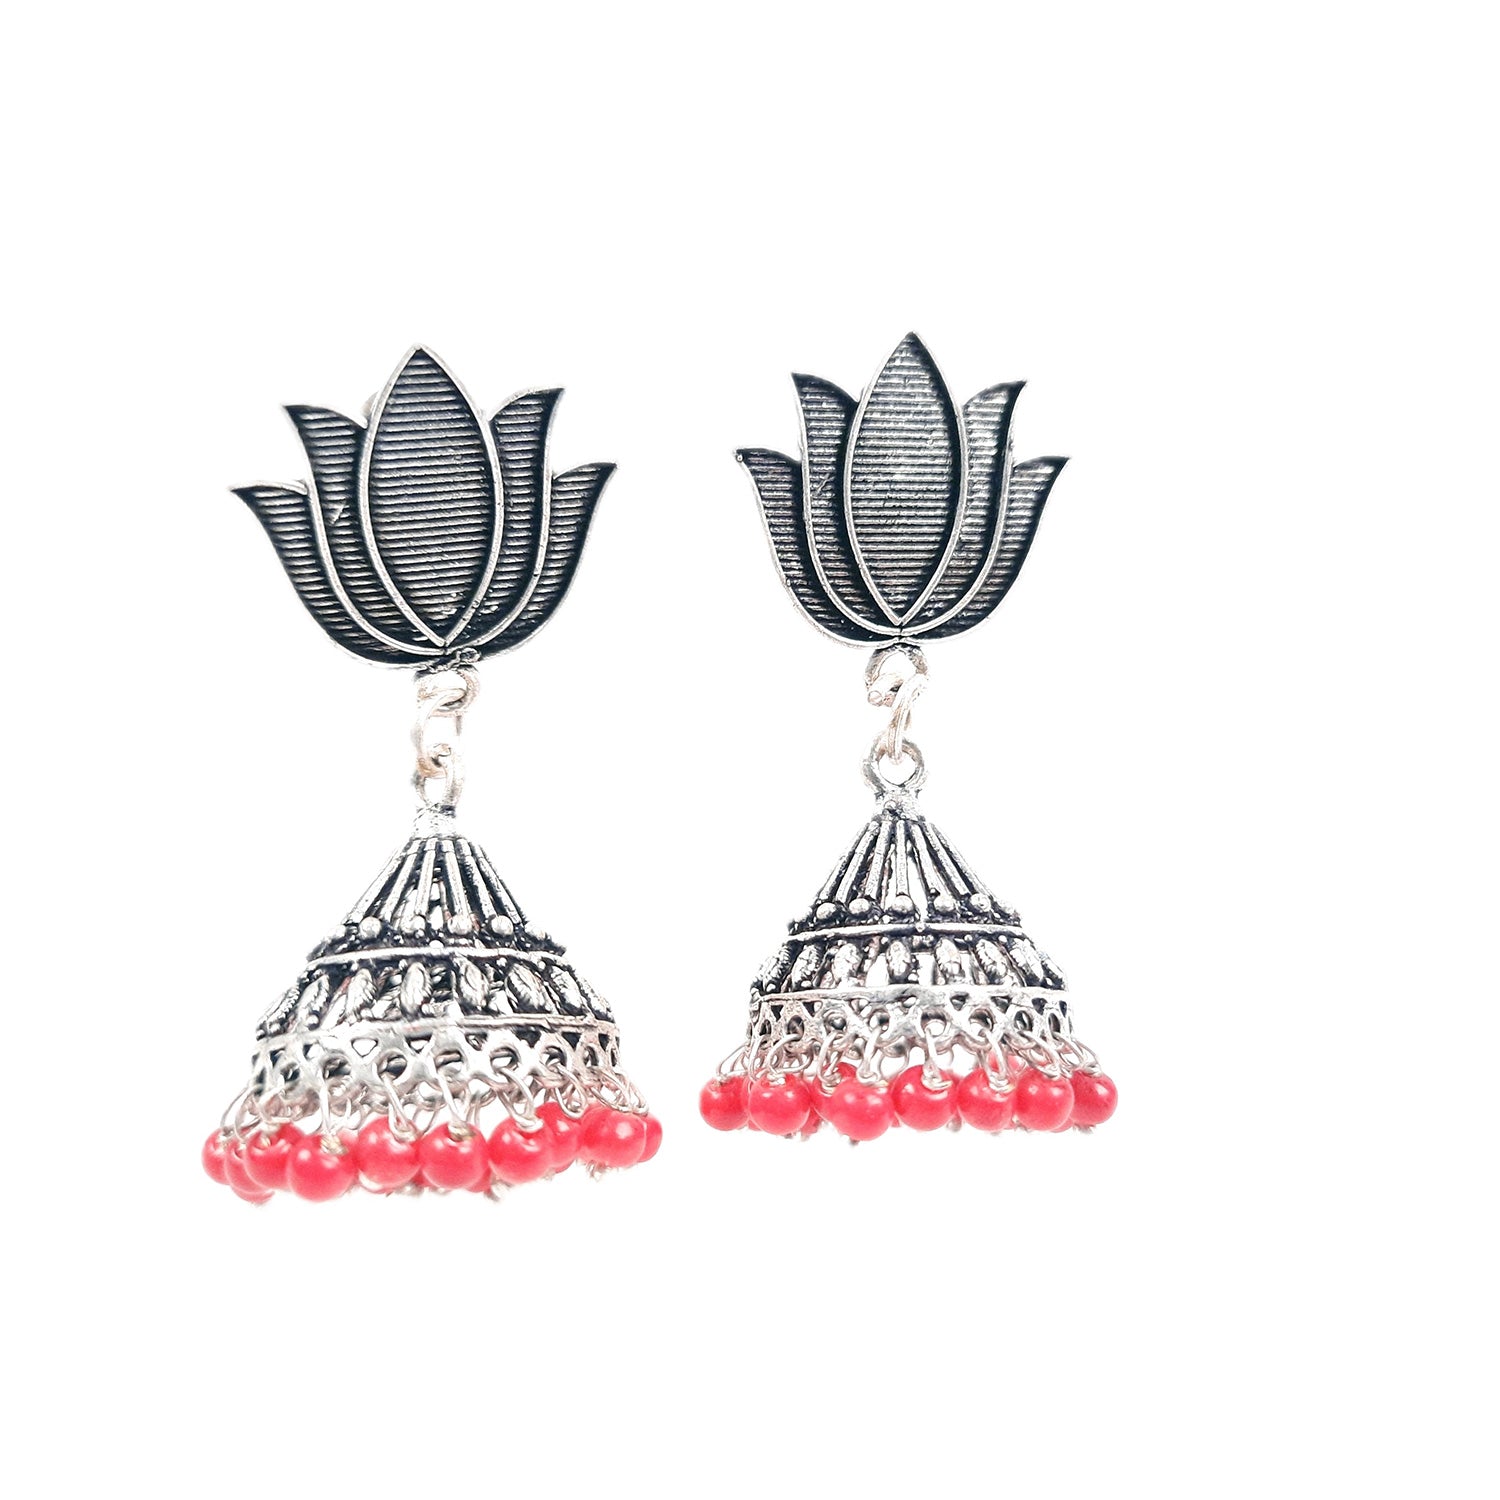 Earrings Jhumka - for Girls and Women | Oxidised Jewelry  | Latest Stylish Fashion Jewellery |  Gifts for Her, Friendship Day, Valentine's Day Gift - apkamart